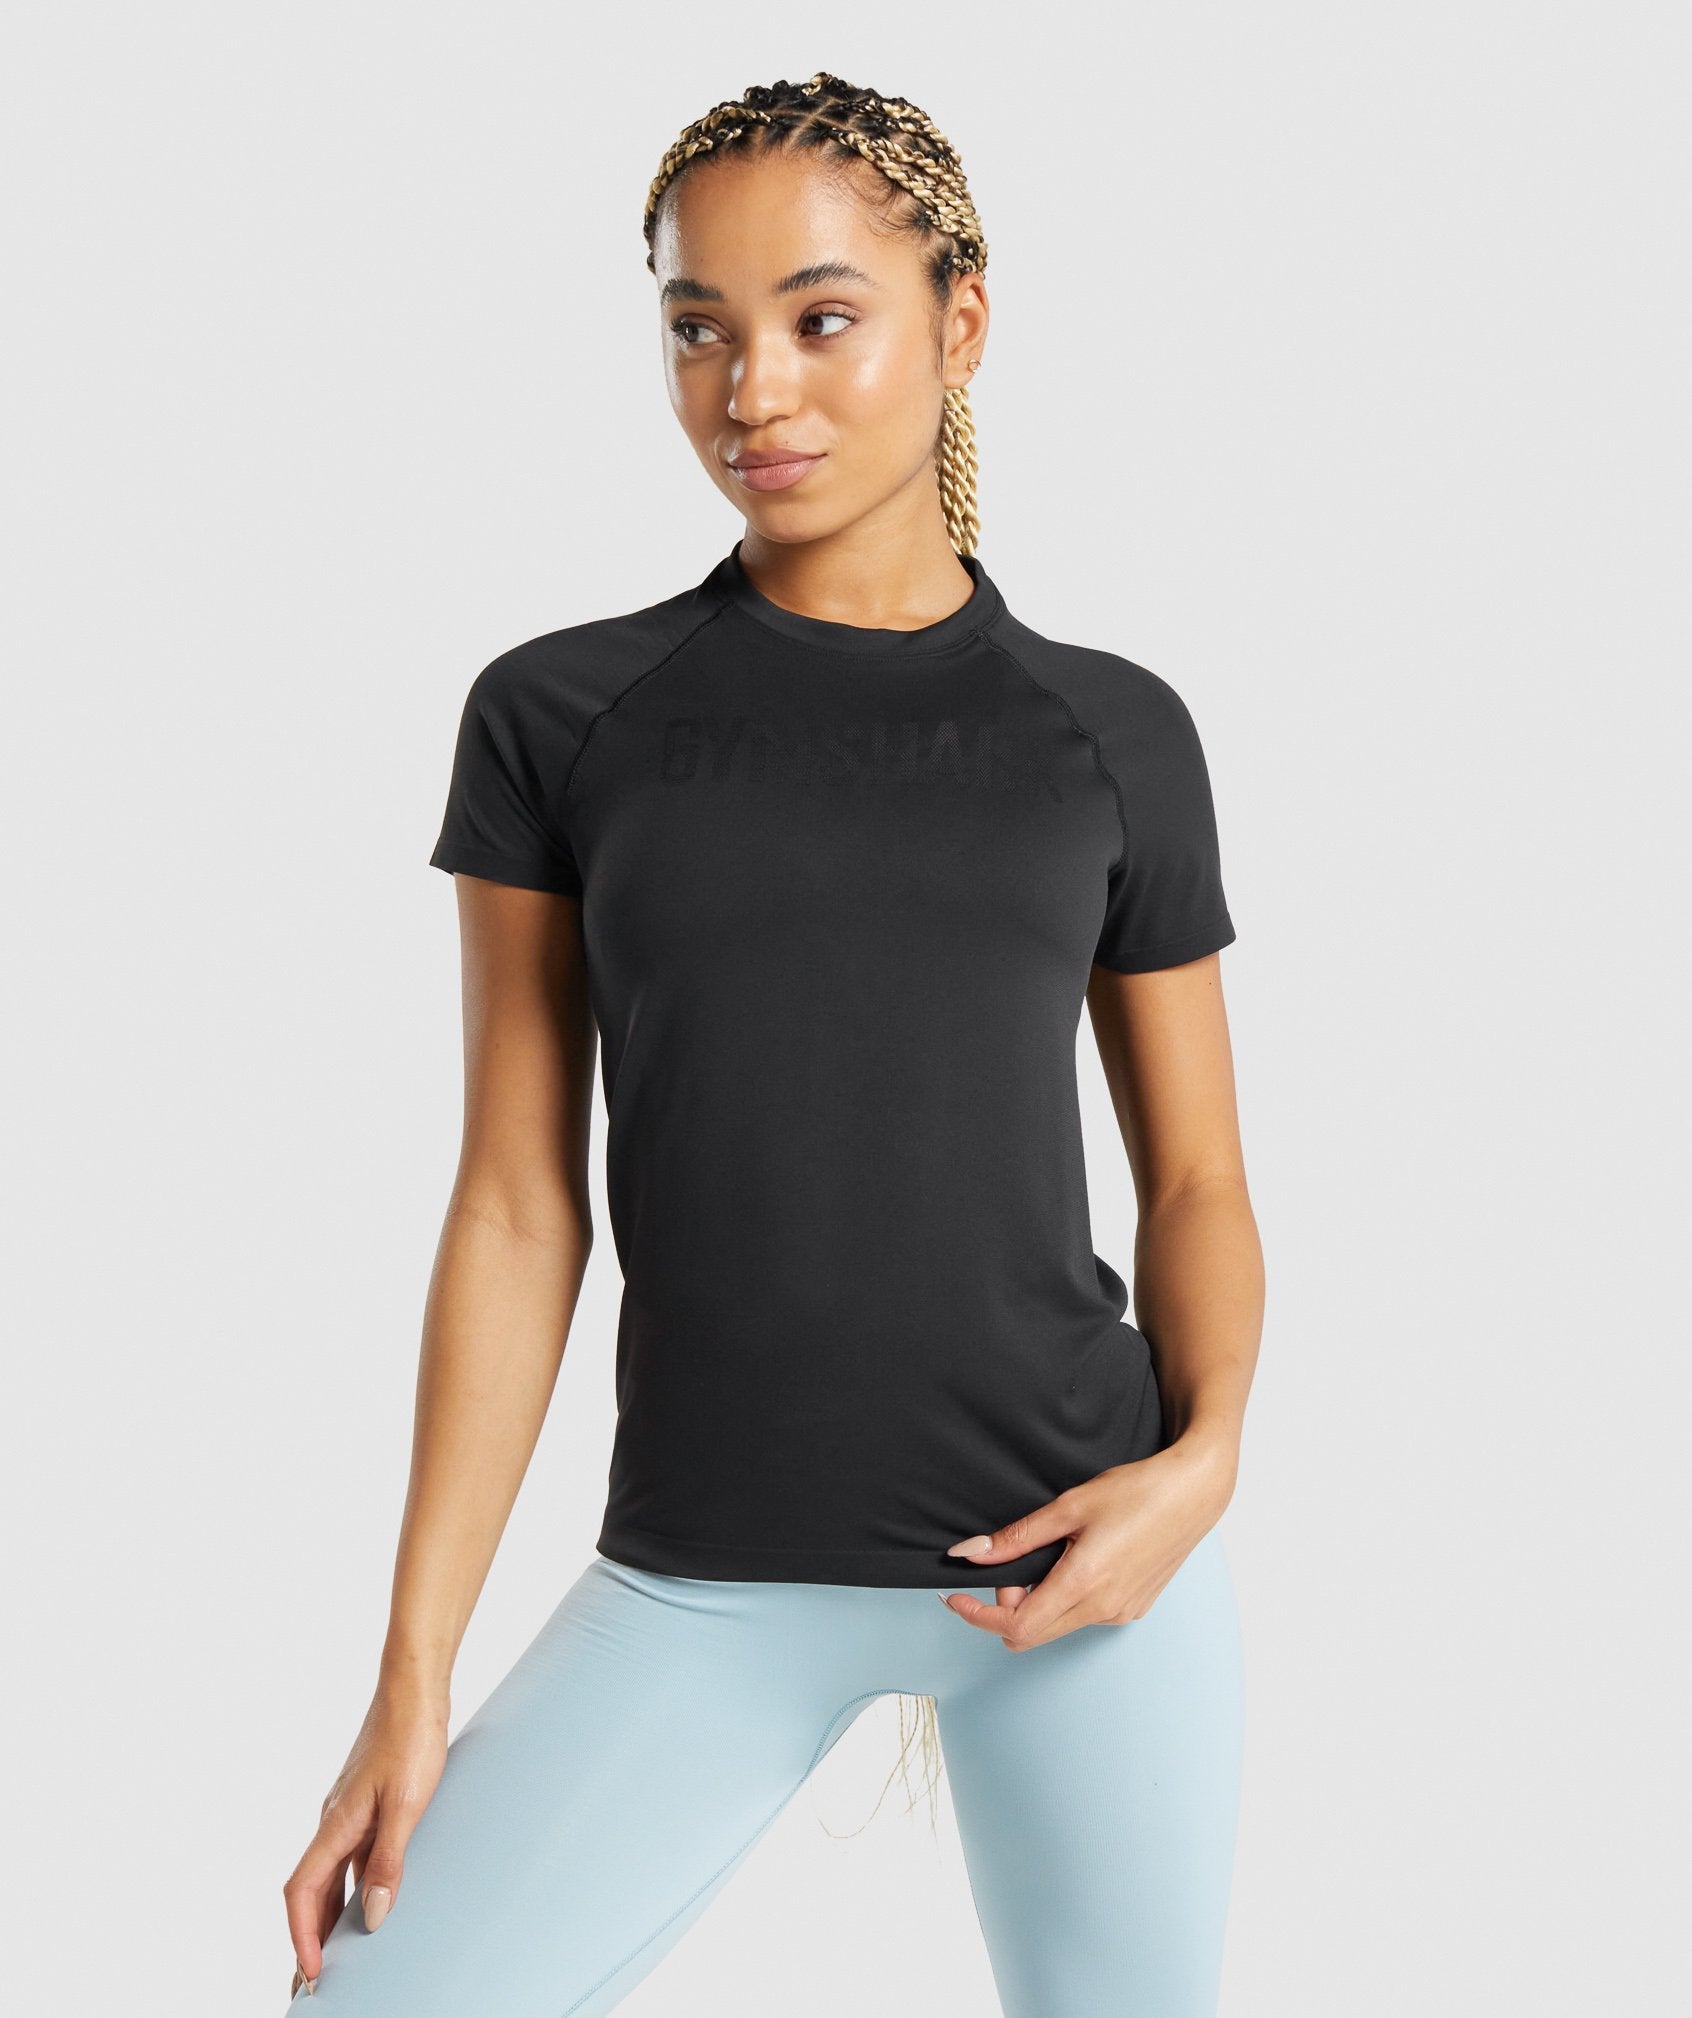 Fit Seamless Loose T-Shirt in Black - view 1